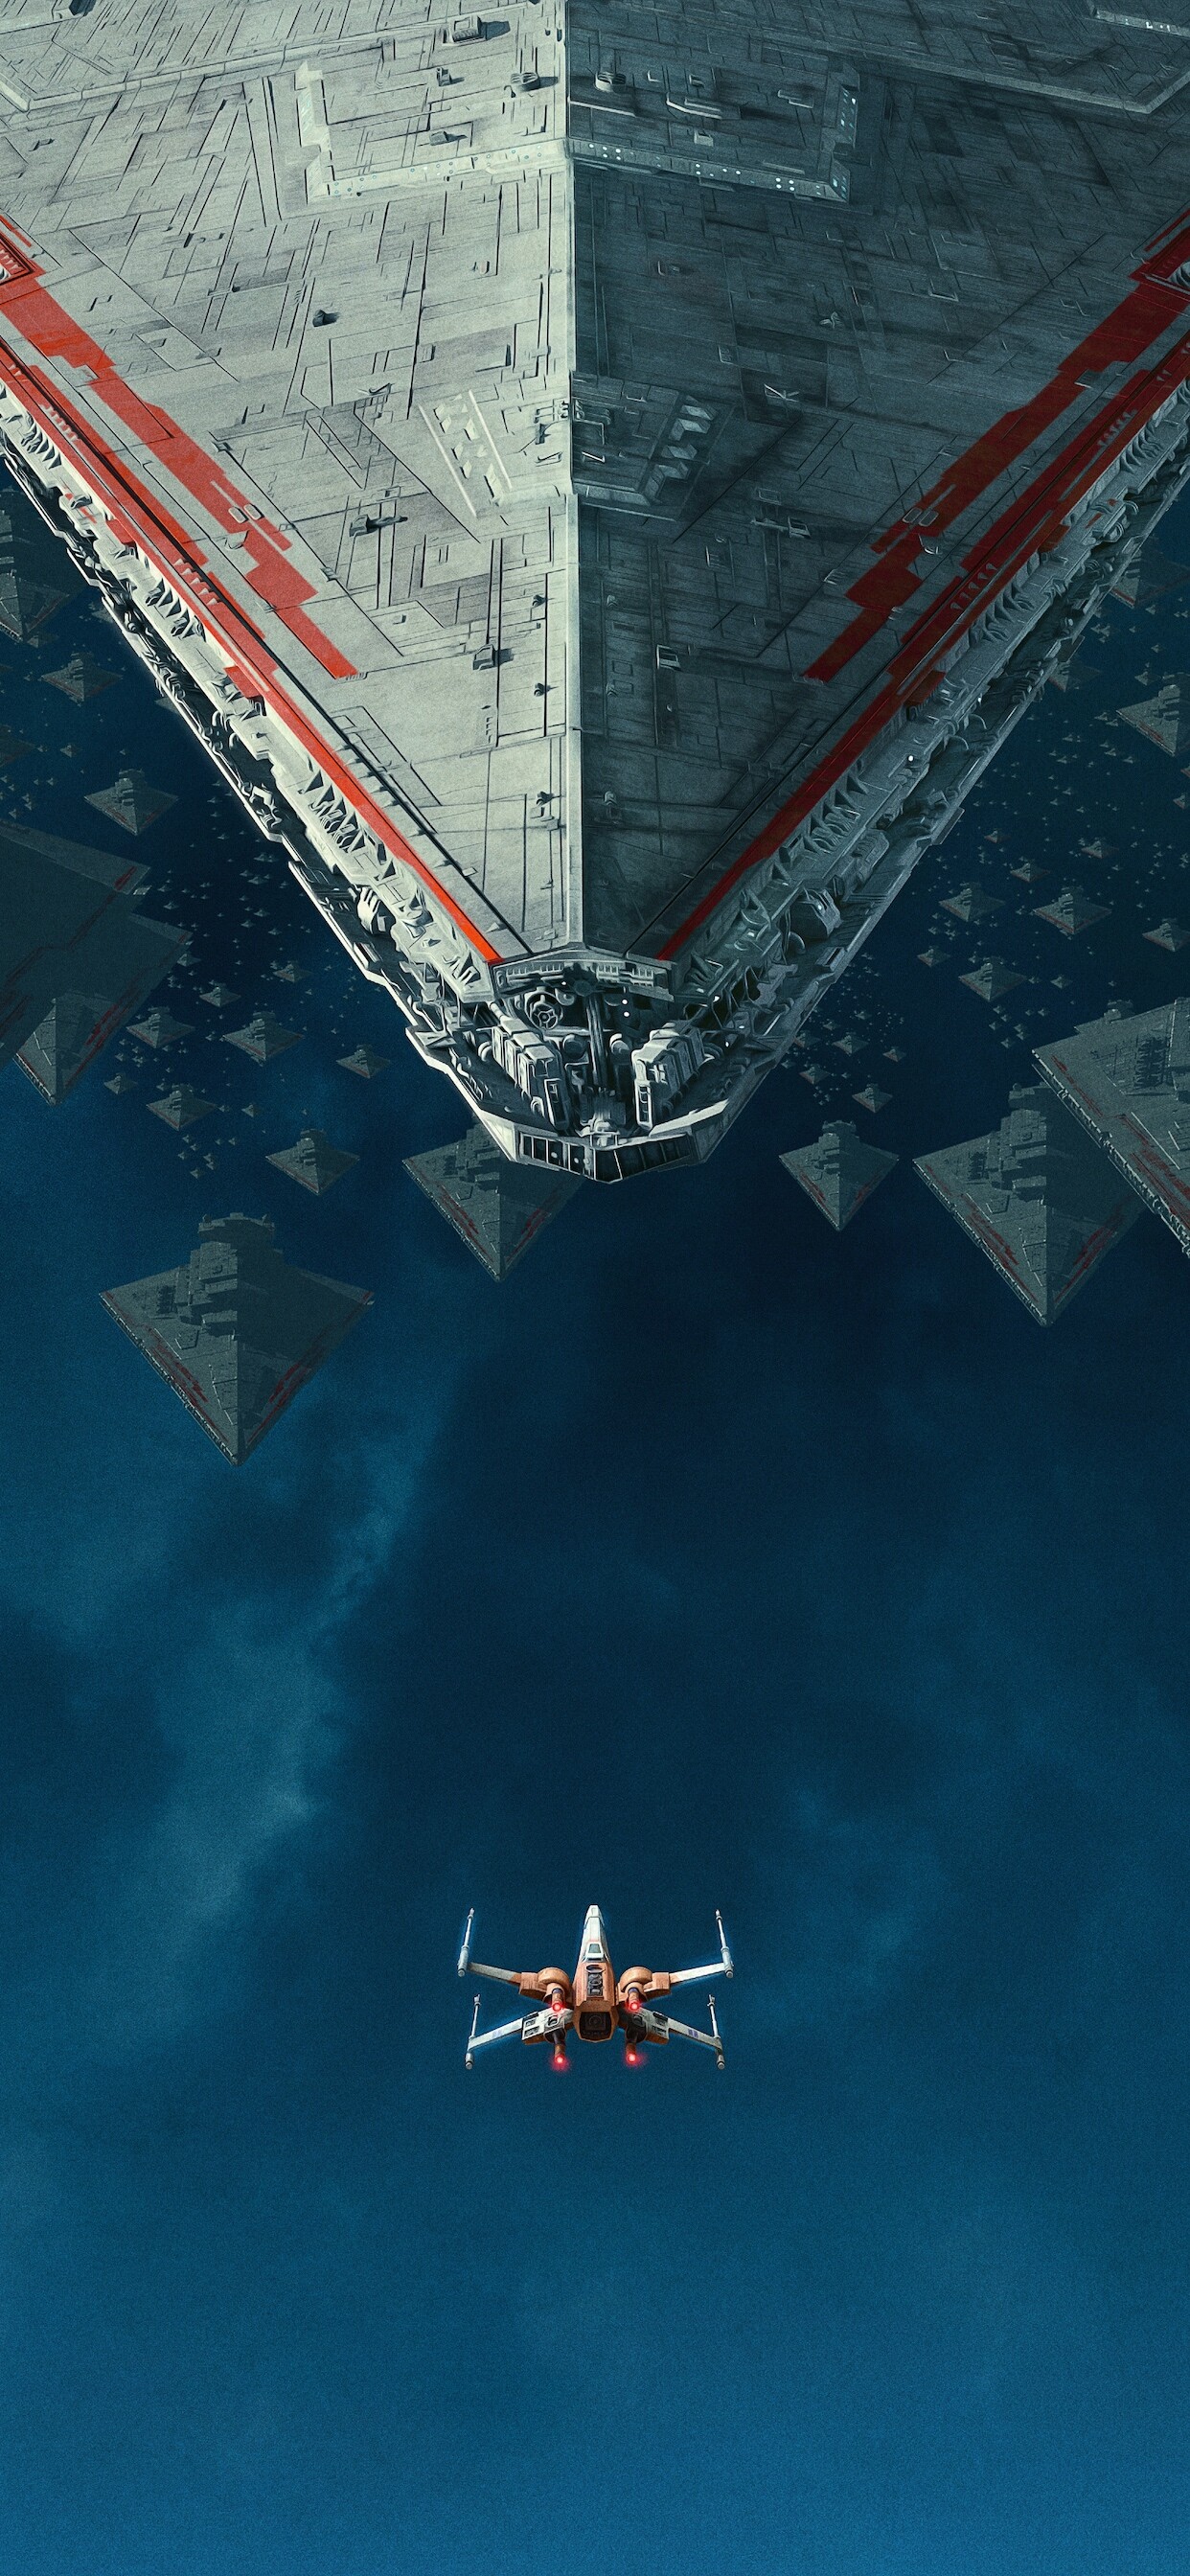 Star Wars: The Rise of Skywalker, A 2019 film directed by J.J. Abrams. 1250x2690 HD Wallpaper.